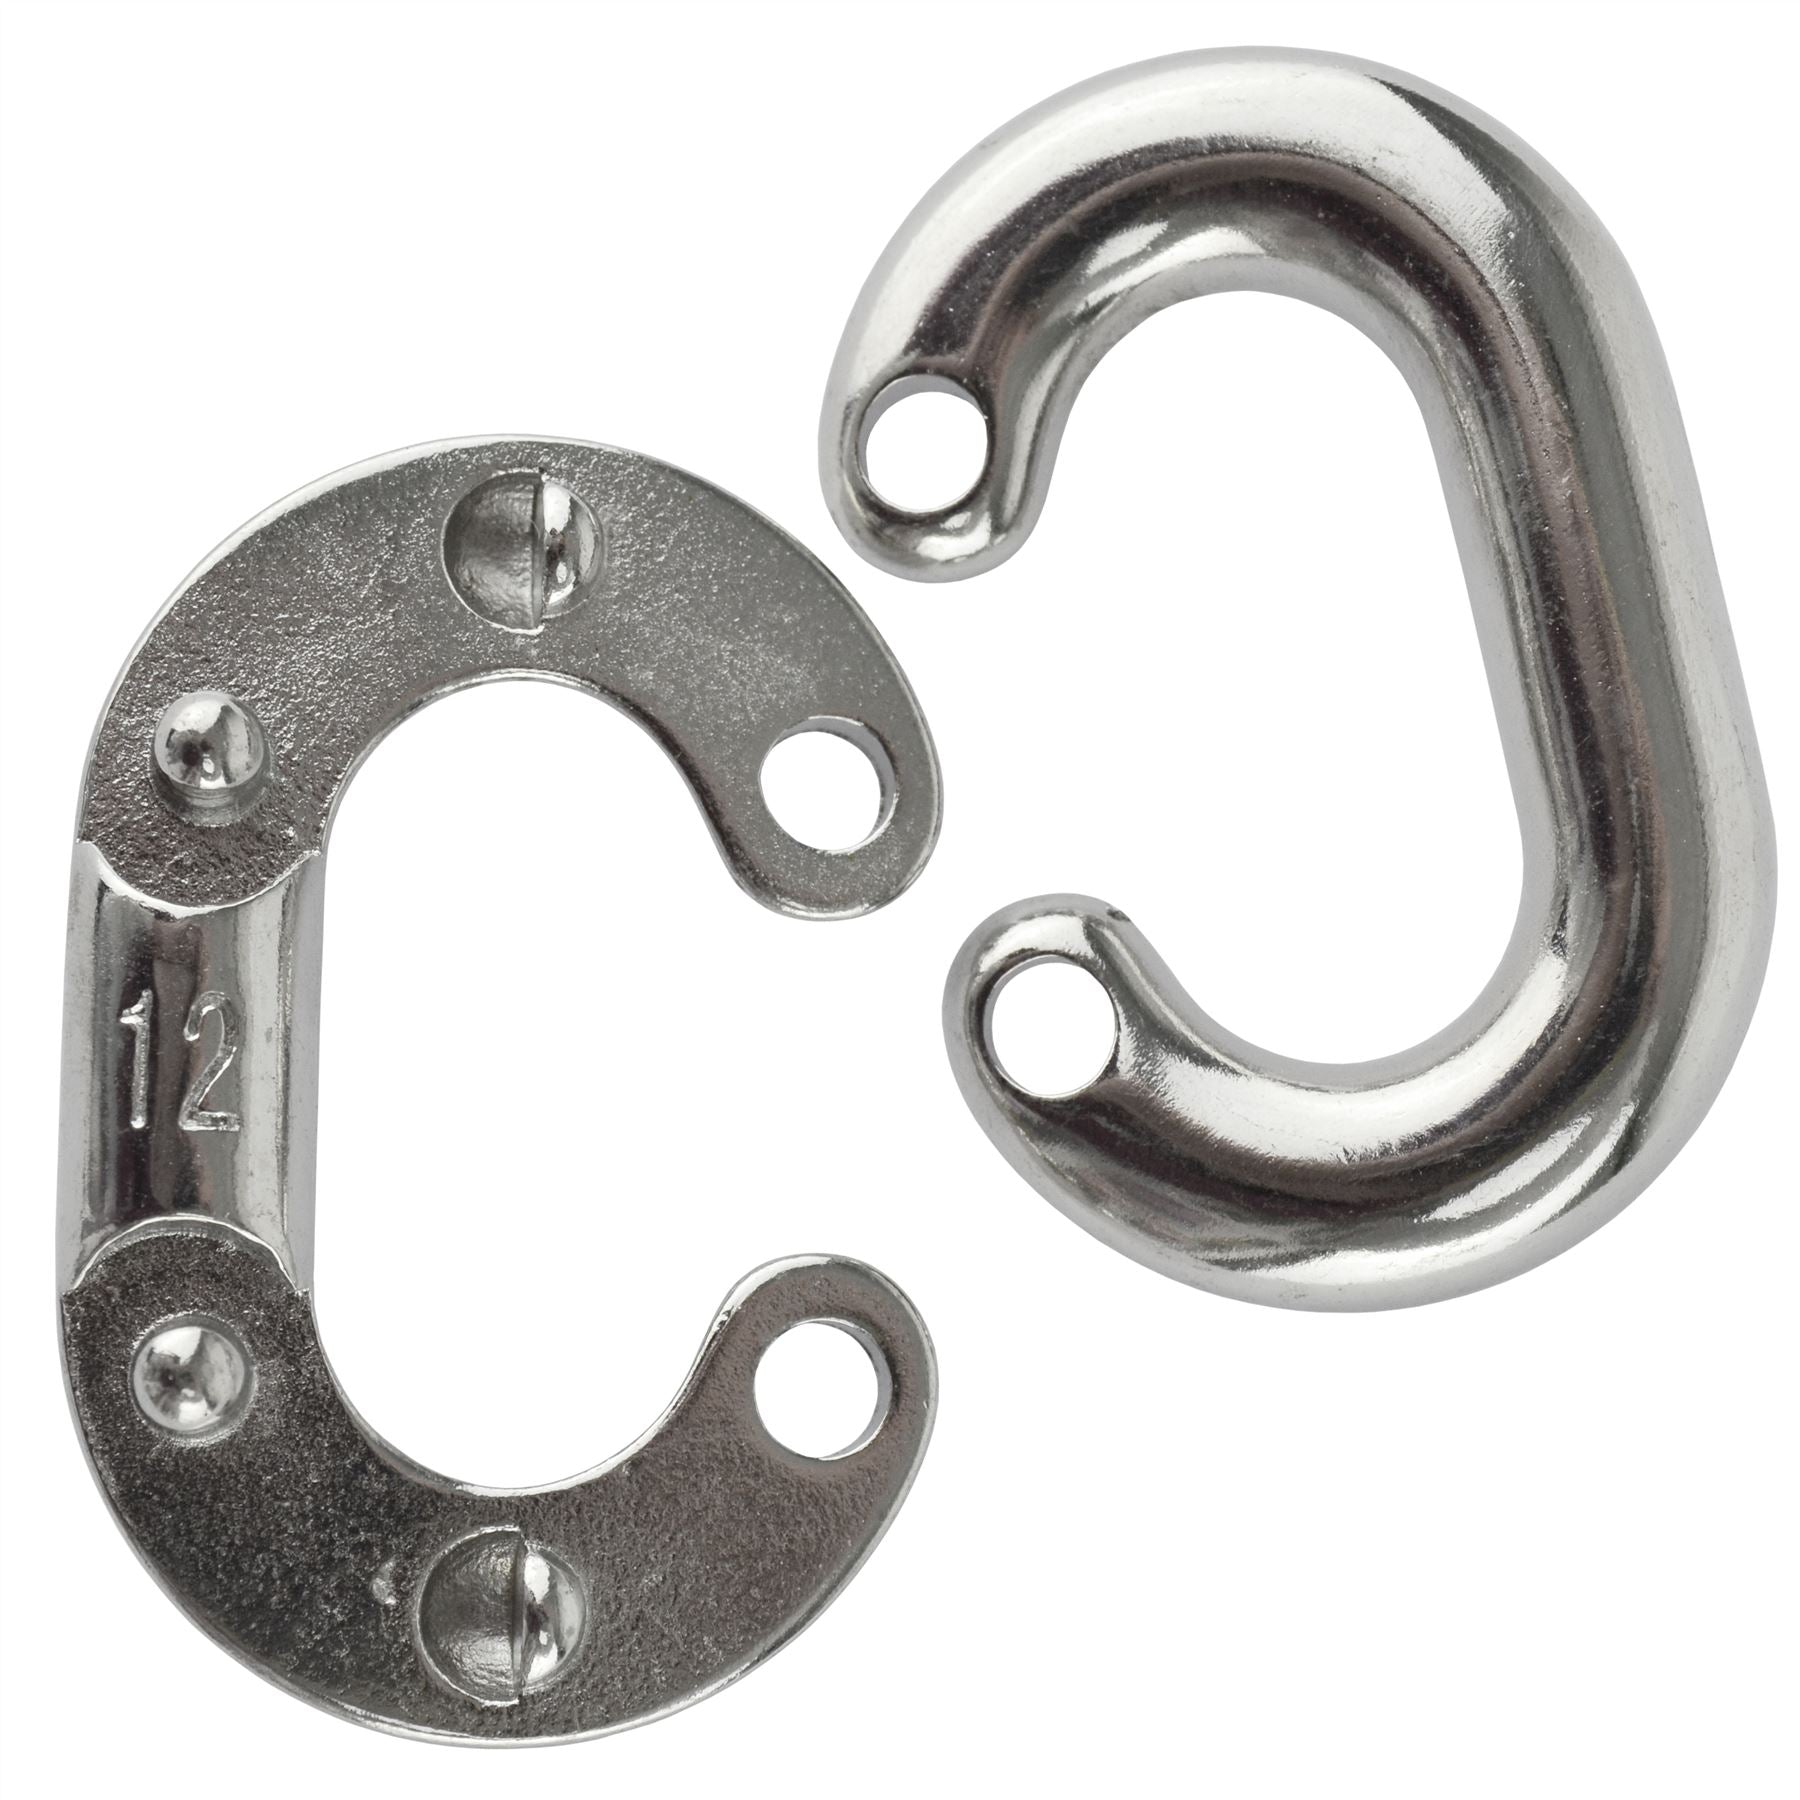 Chain Connecting Link 12mm Marine Grade Stainless Steel Split Shackle